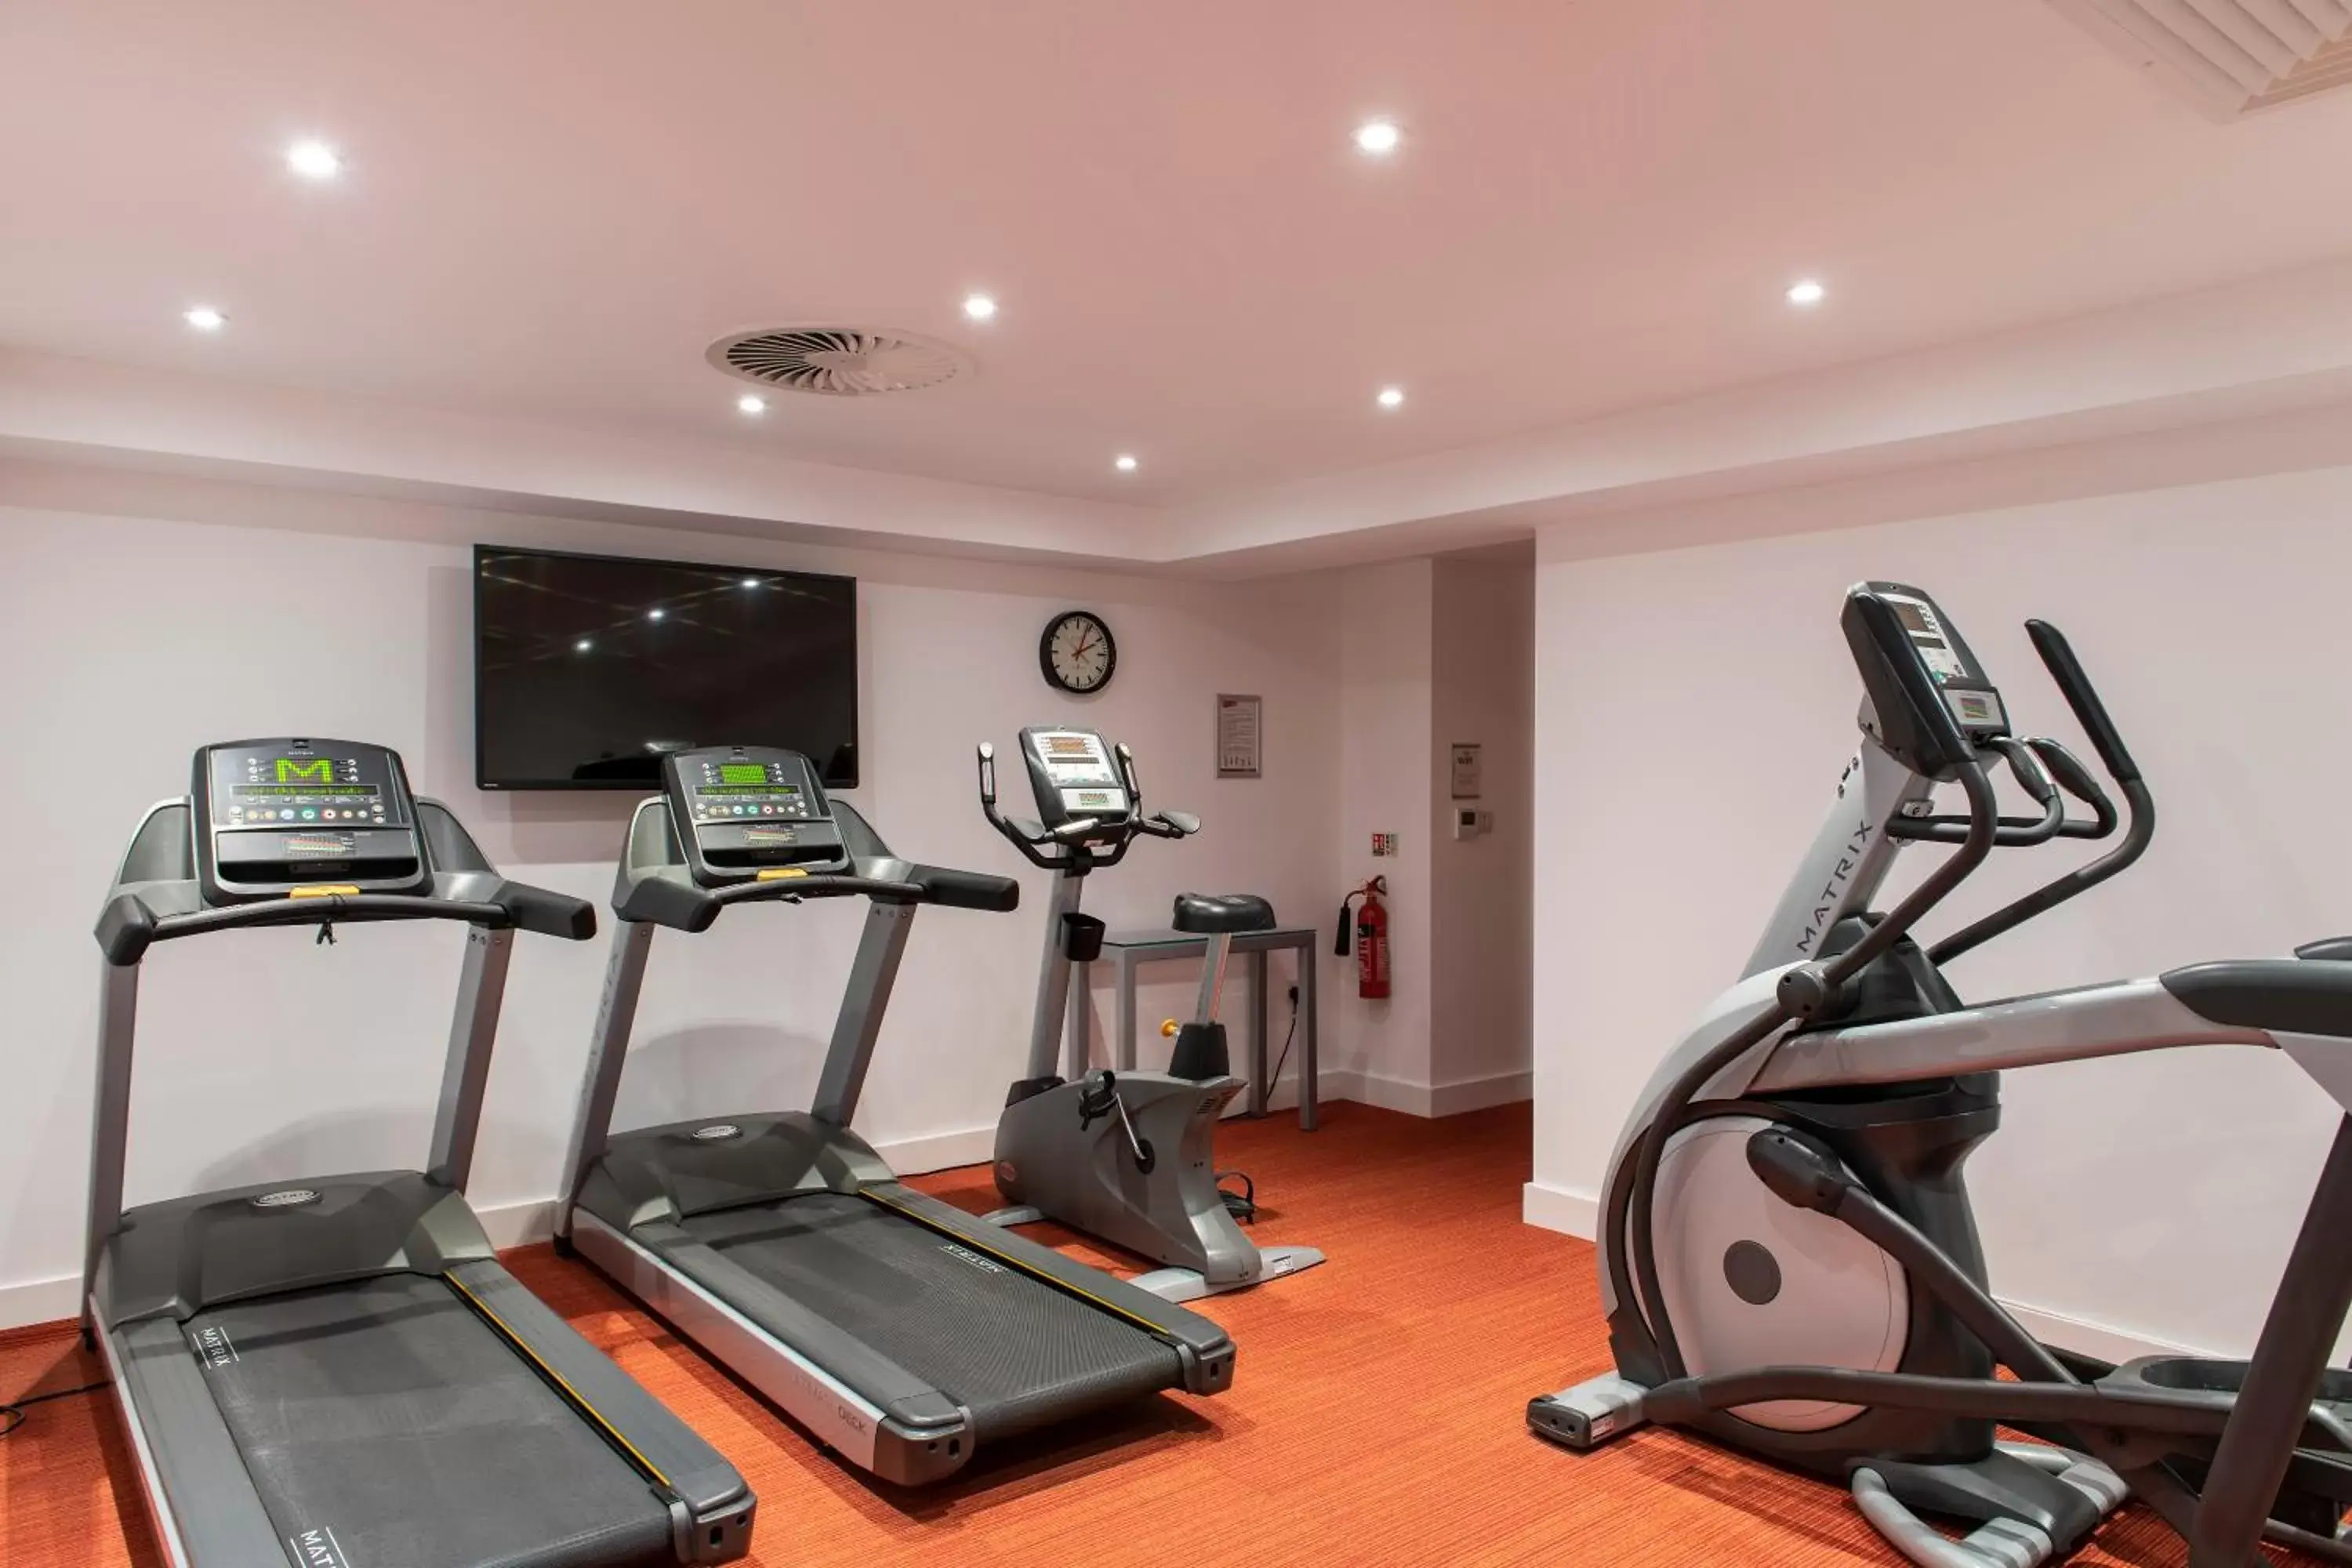 Fitness centre/facilities, Fitness Center/Facilities in Cove Minshull Street